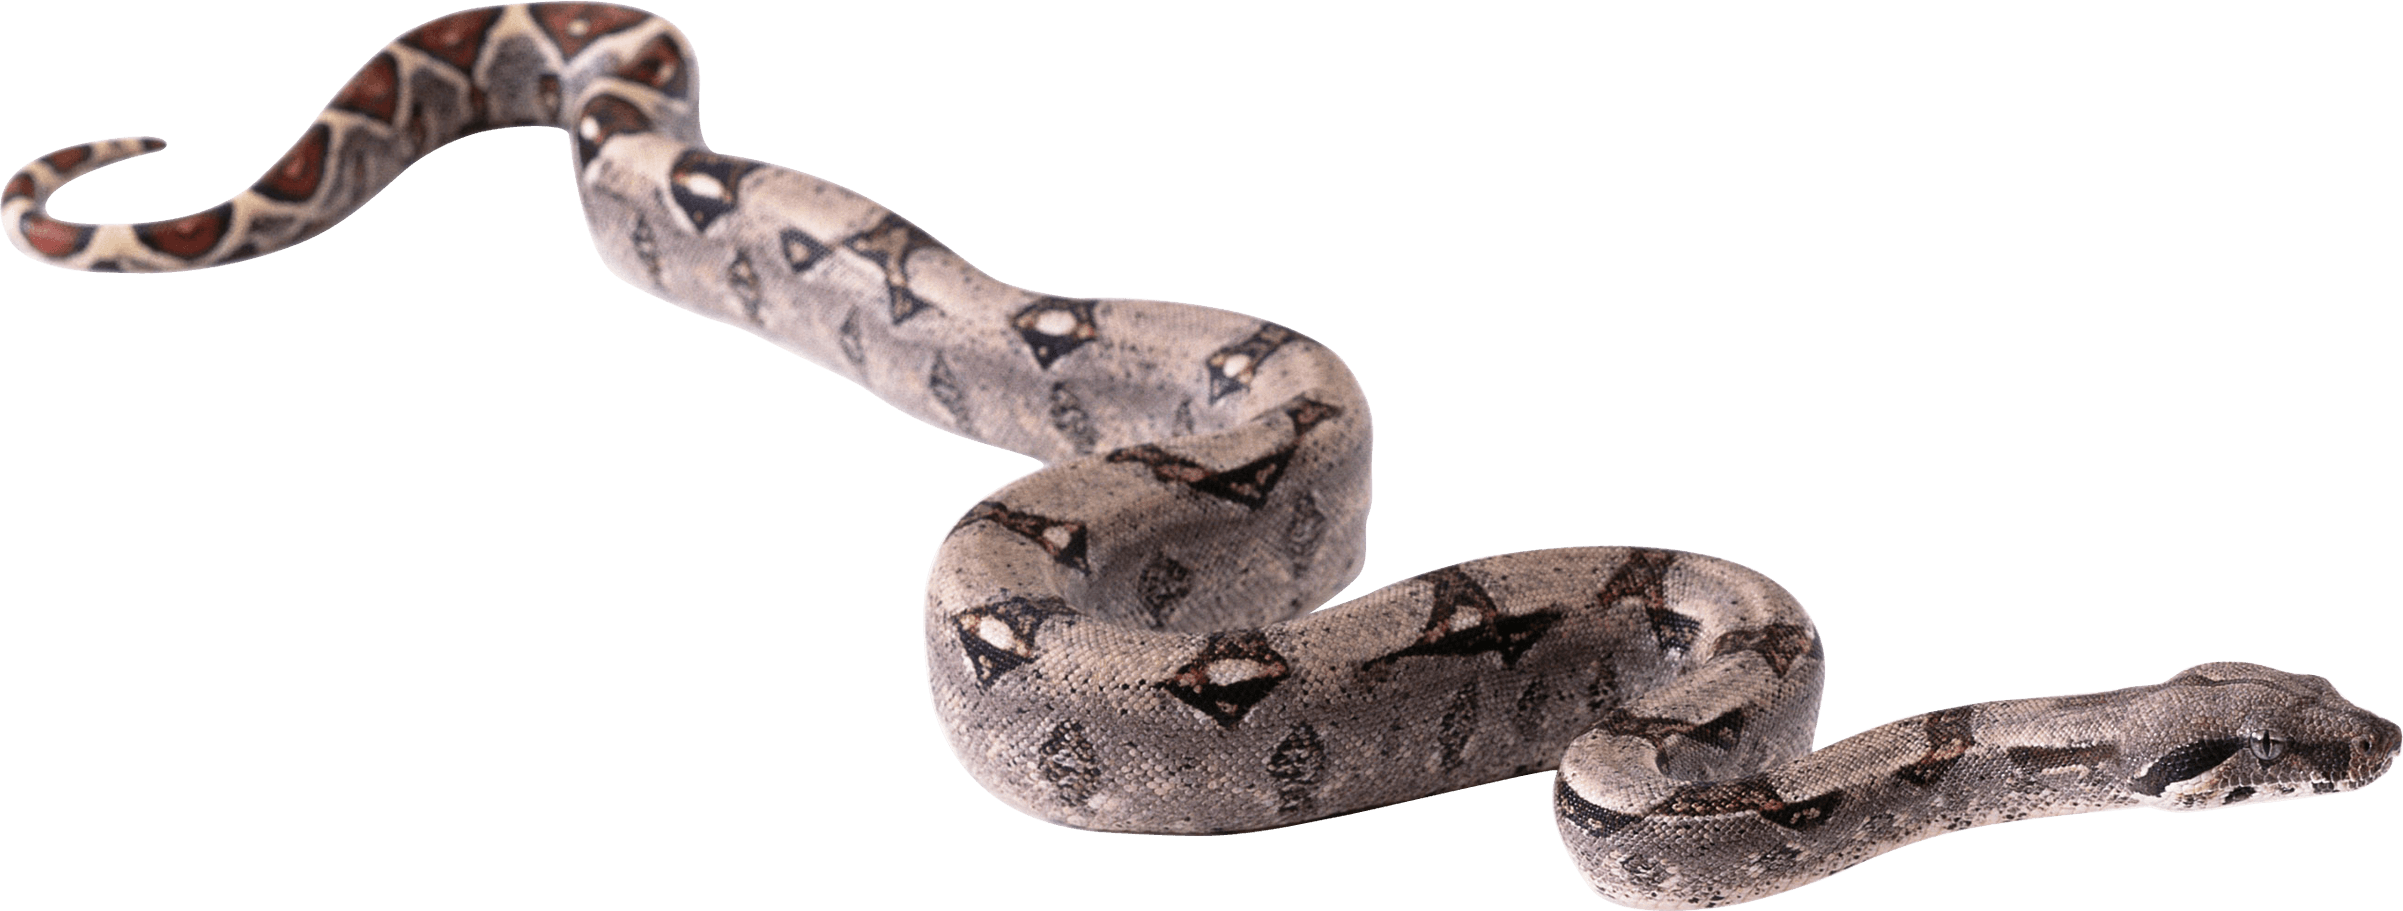 Boa Constrictor PNG HD